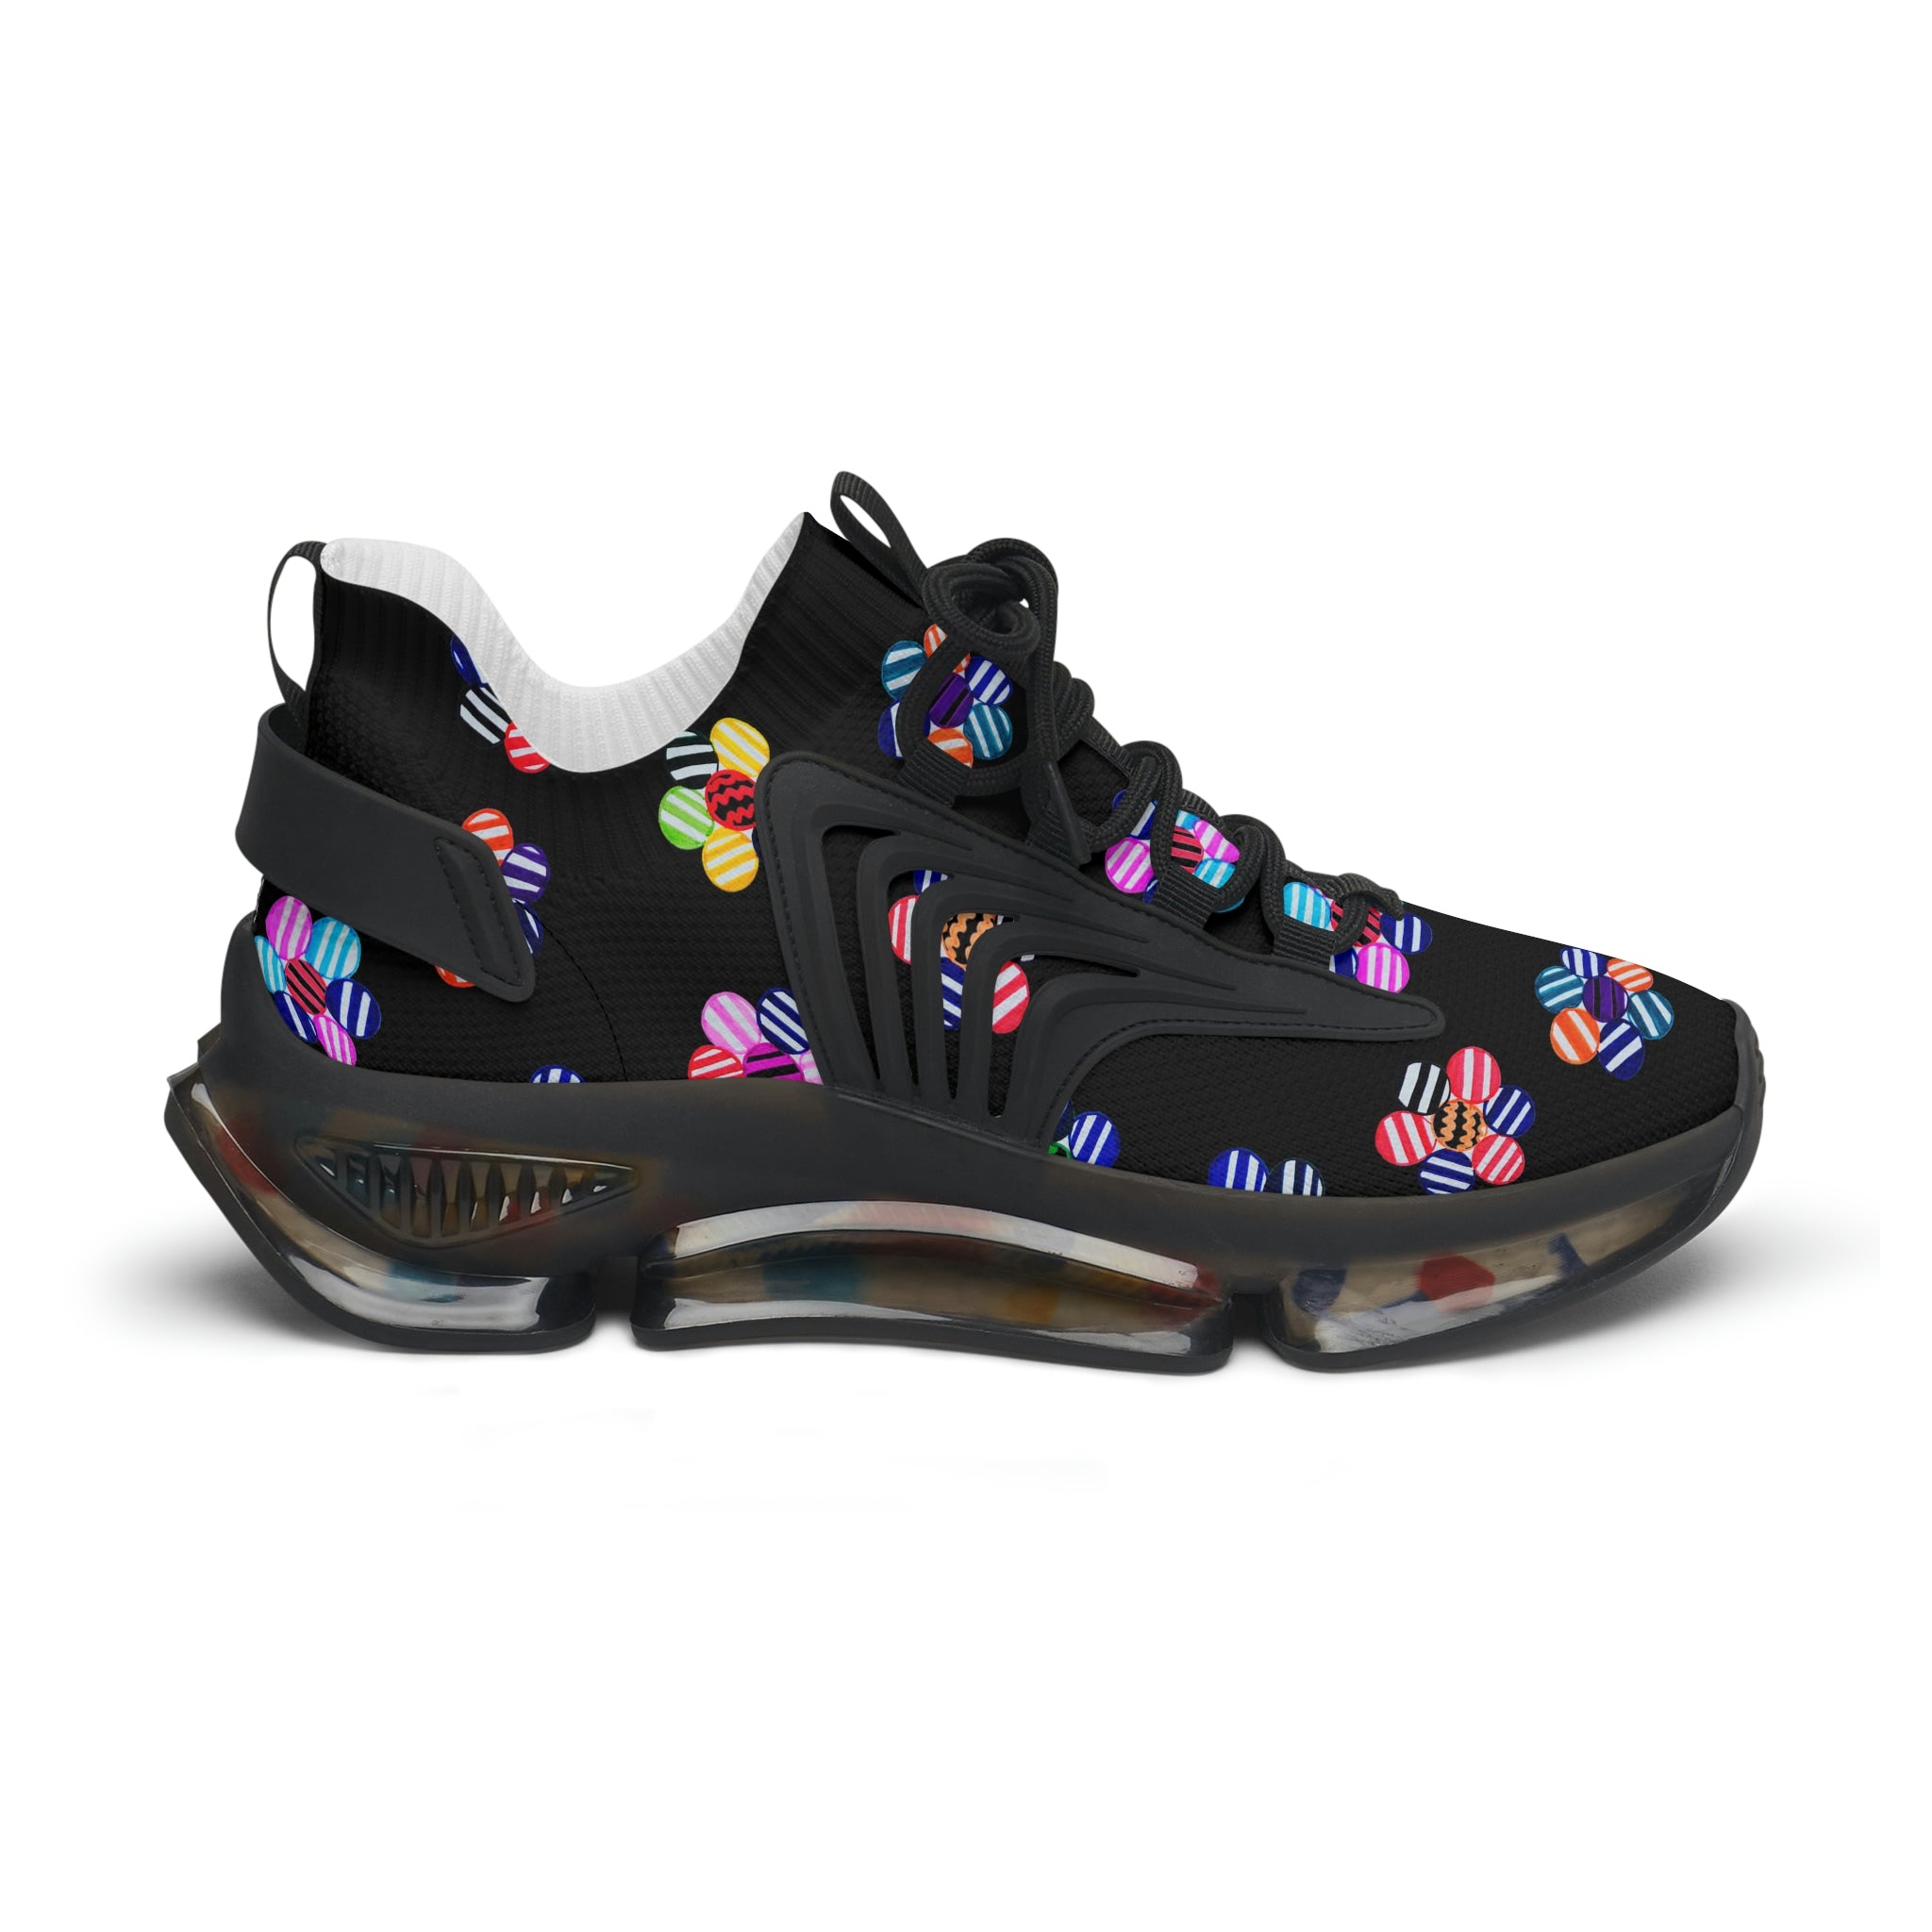 Black Candy Floral Printed OTT Women's Mesh Knit Sneakers